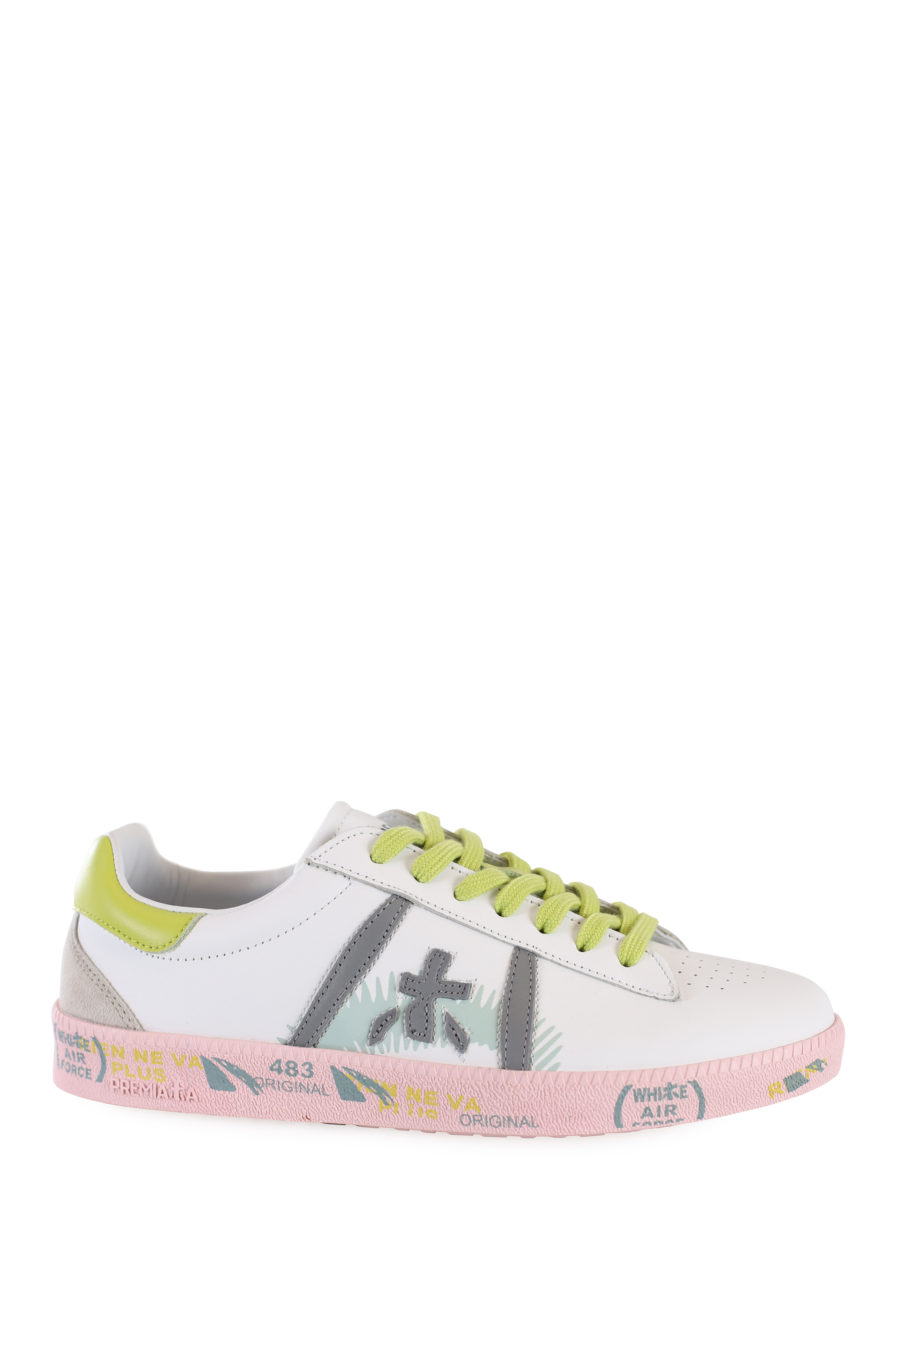 White trainers with green details and pink sole "Andyd" - IMG 1695